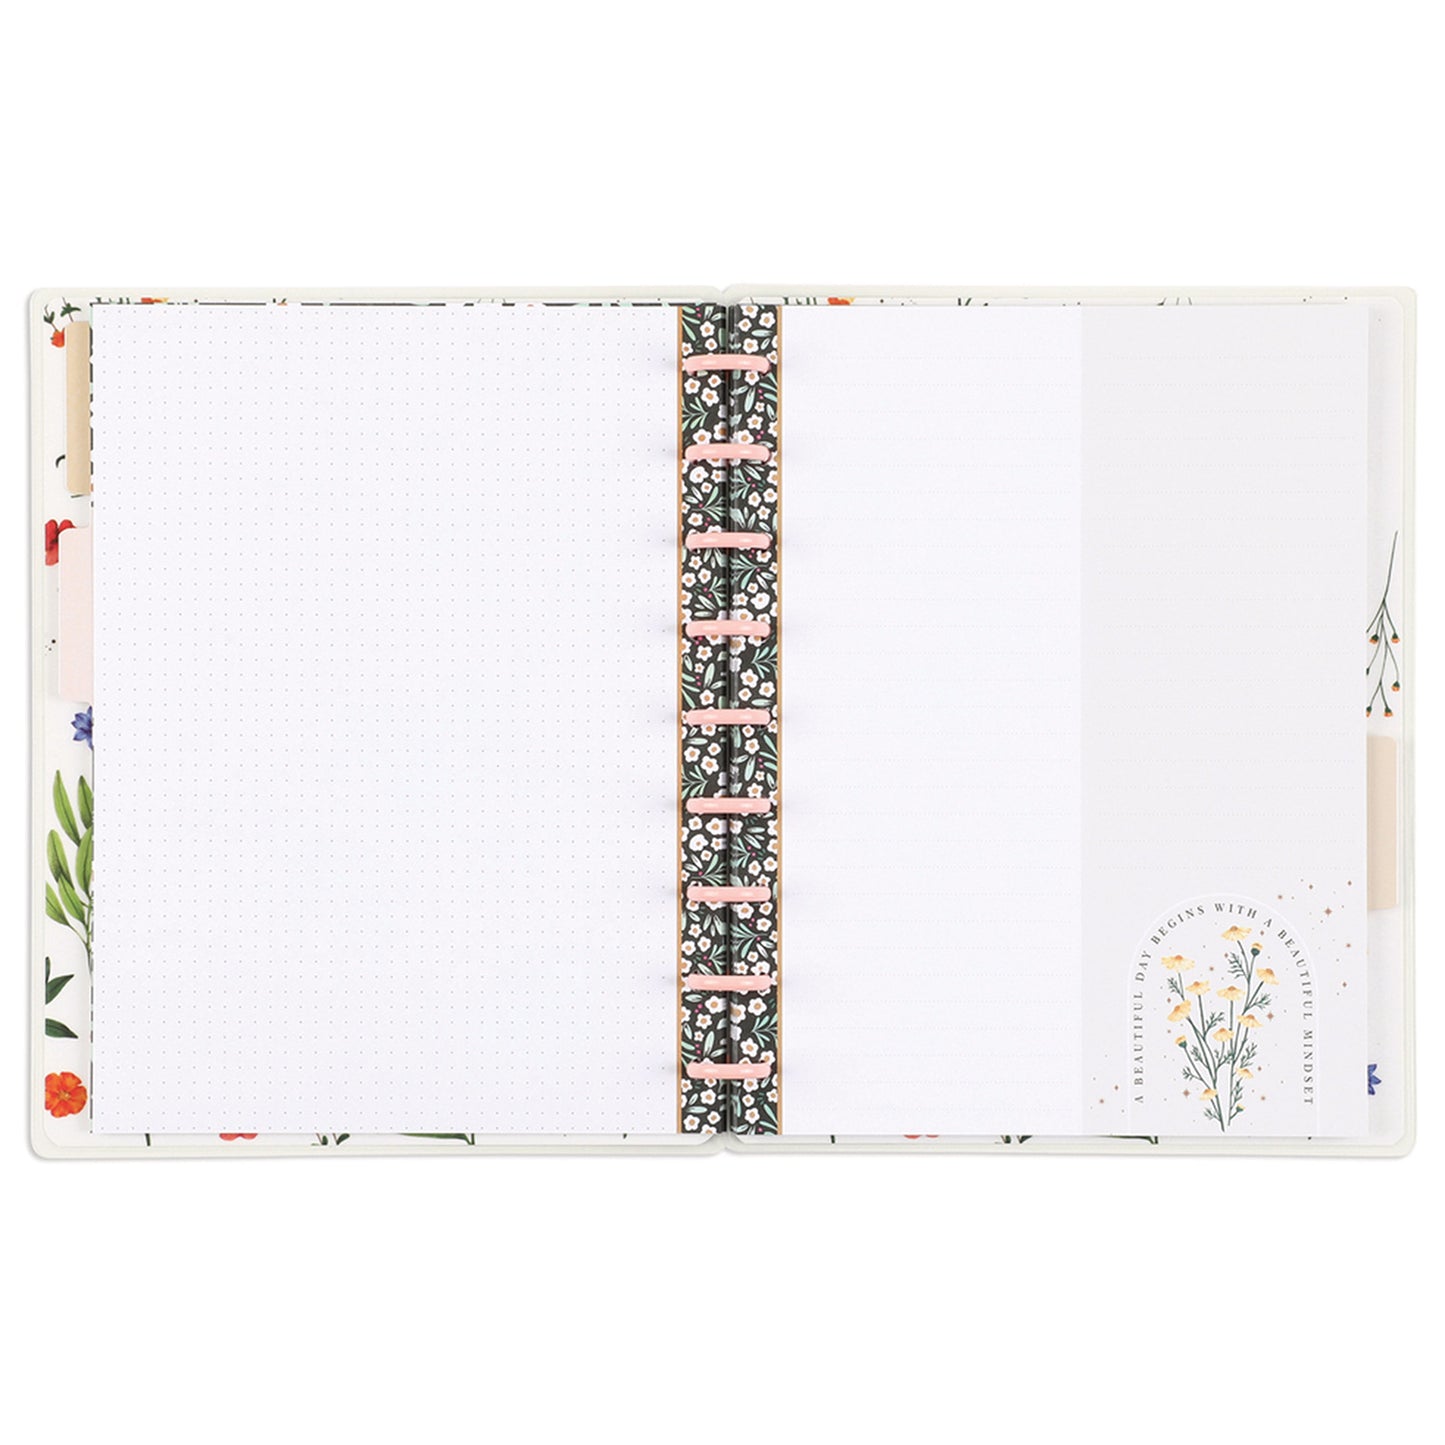 Happy Planner - Happy Notes Classic - Moody Blooms